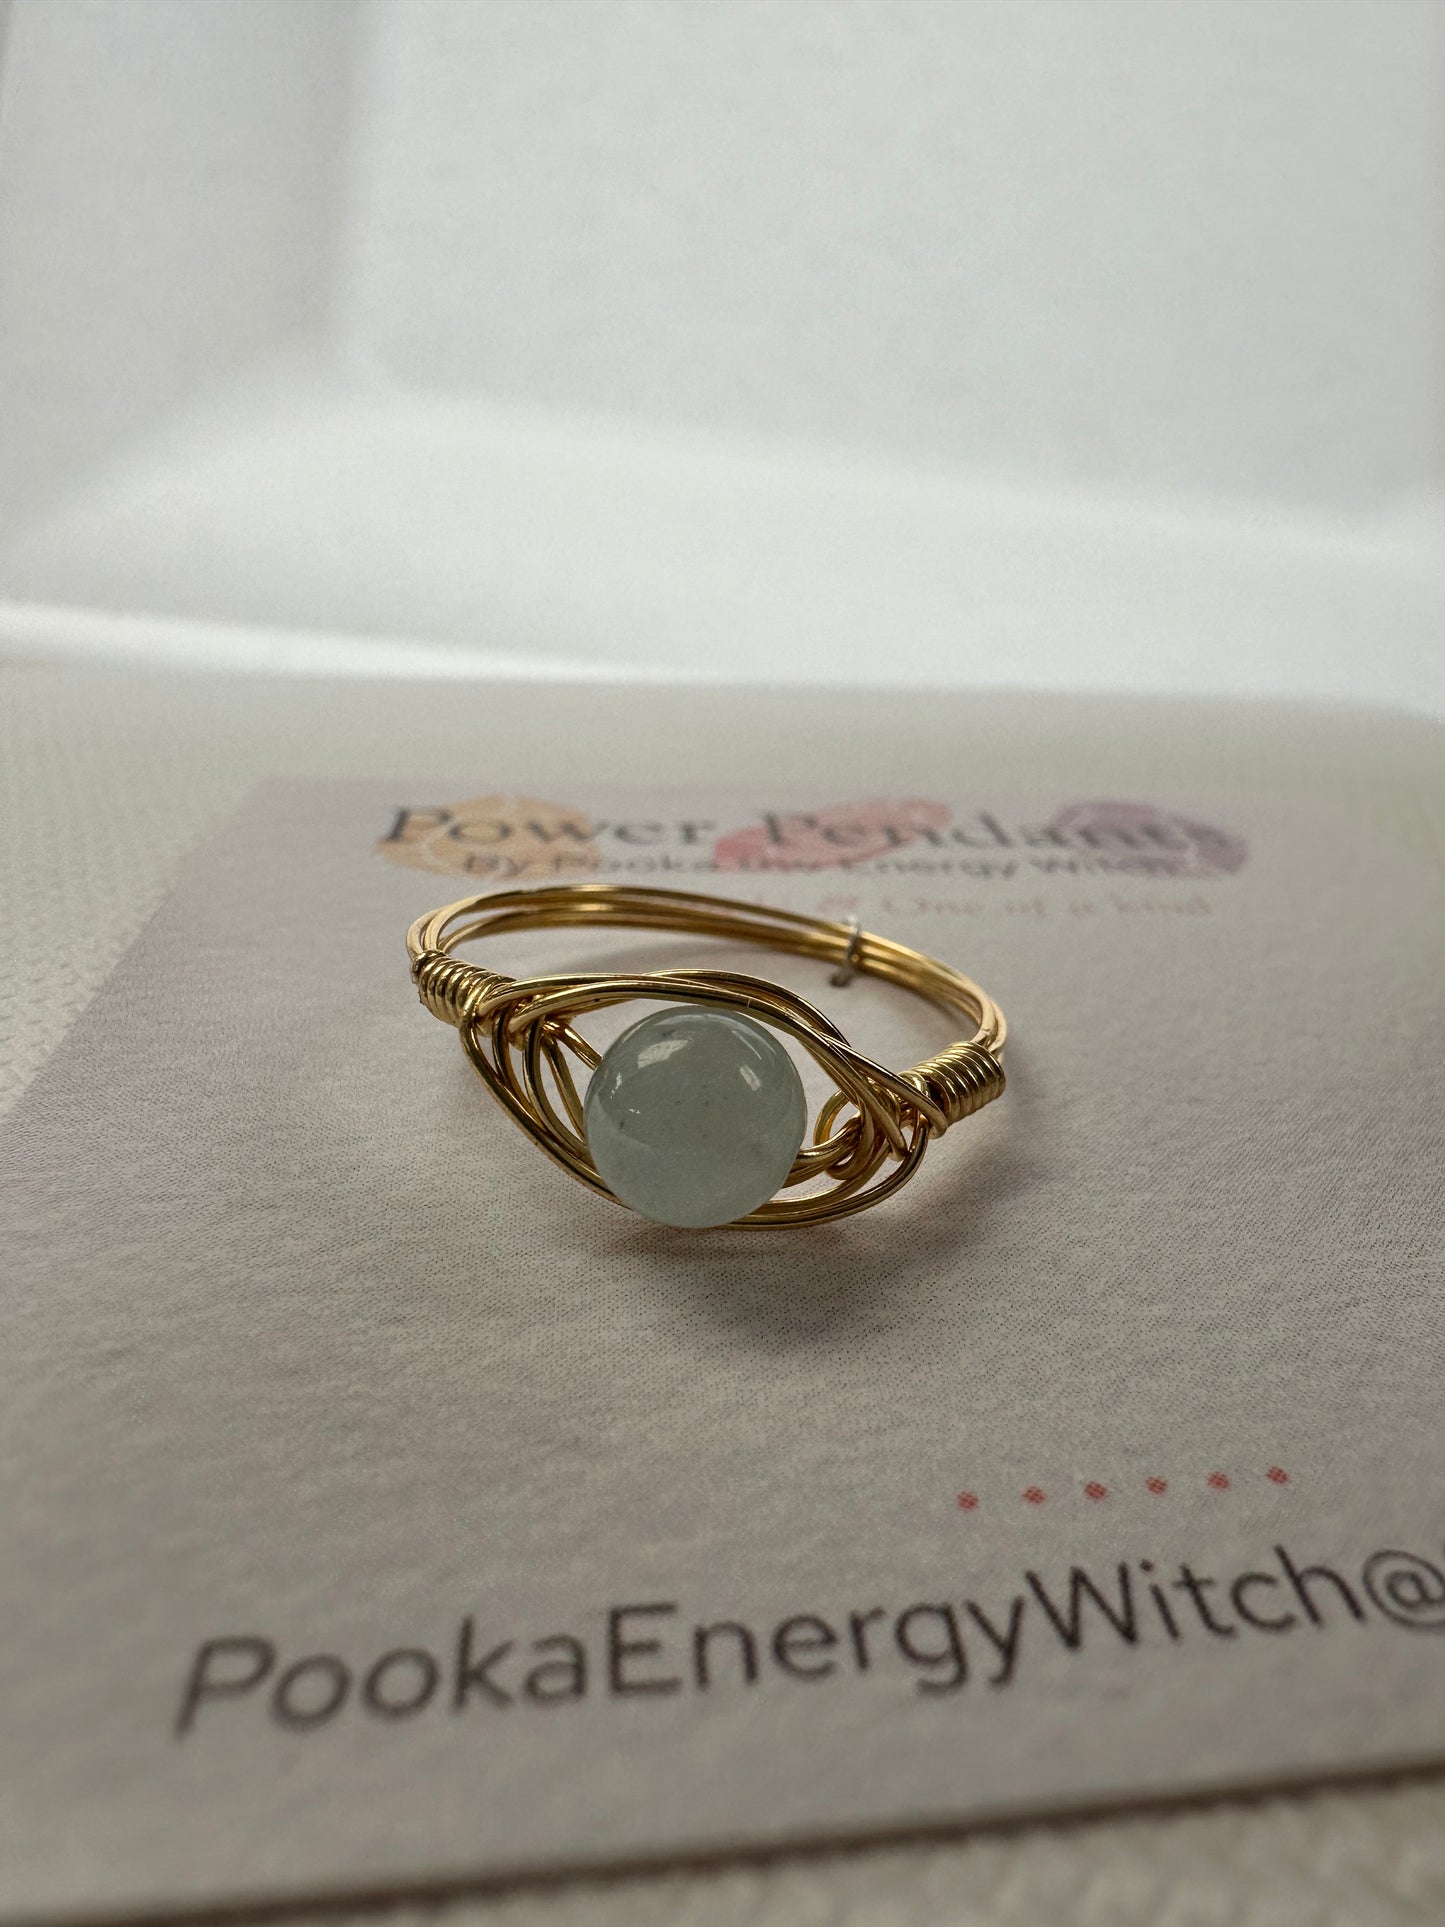 Pooka the Energy Witch - Wire Wrap Ring - Gold Colored Wrap  - Aquamarine